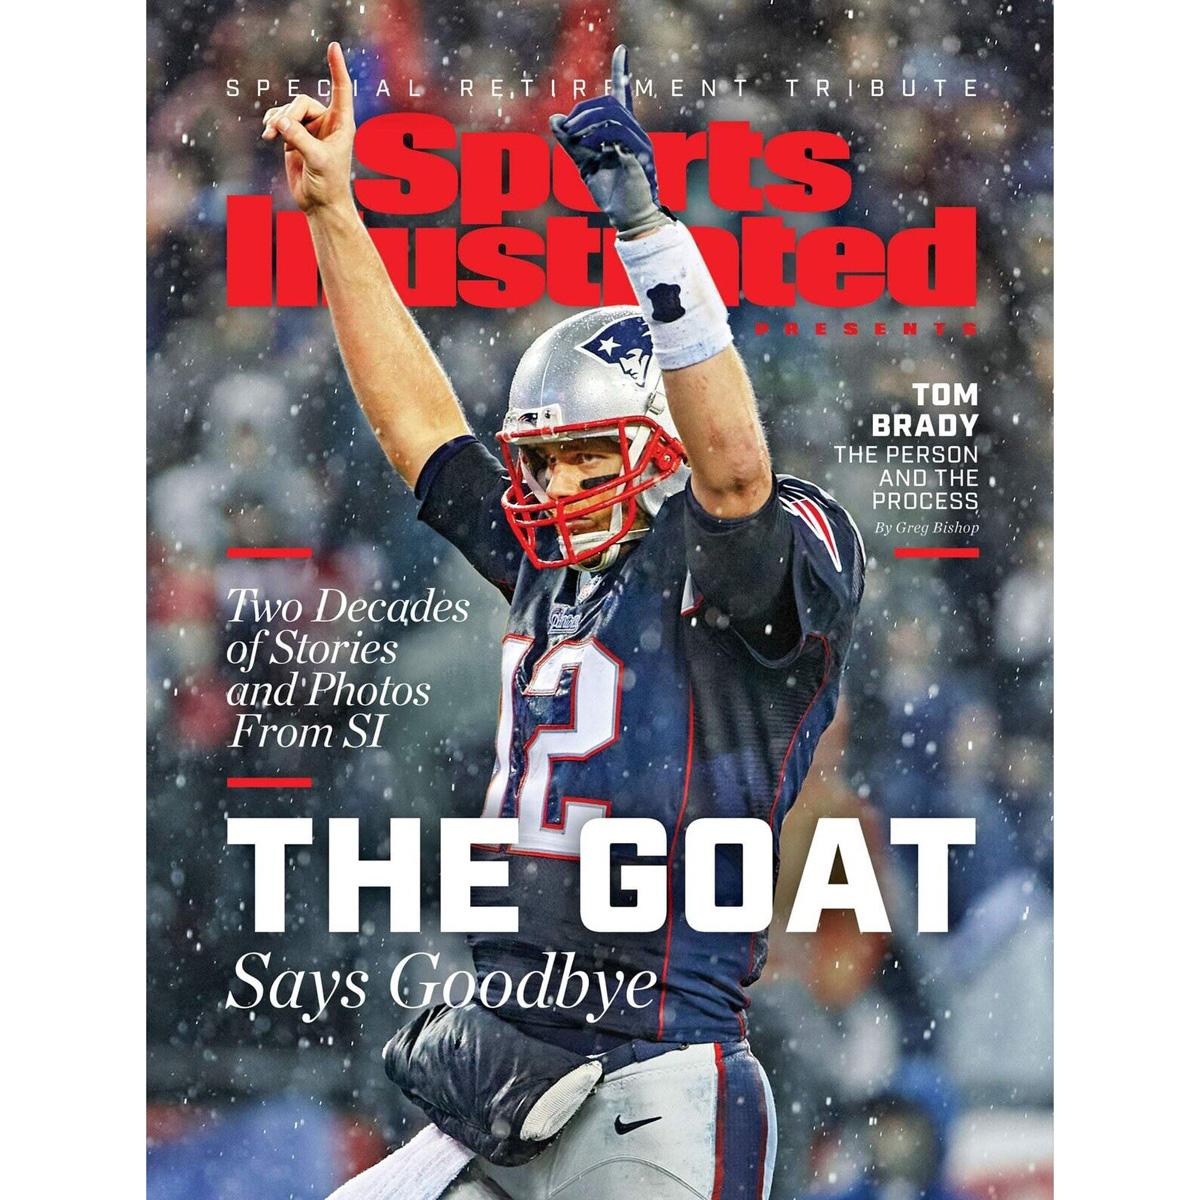 Sports Illustrated Magazine Year Subscription for $9.95